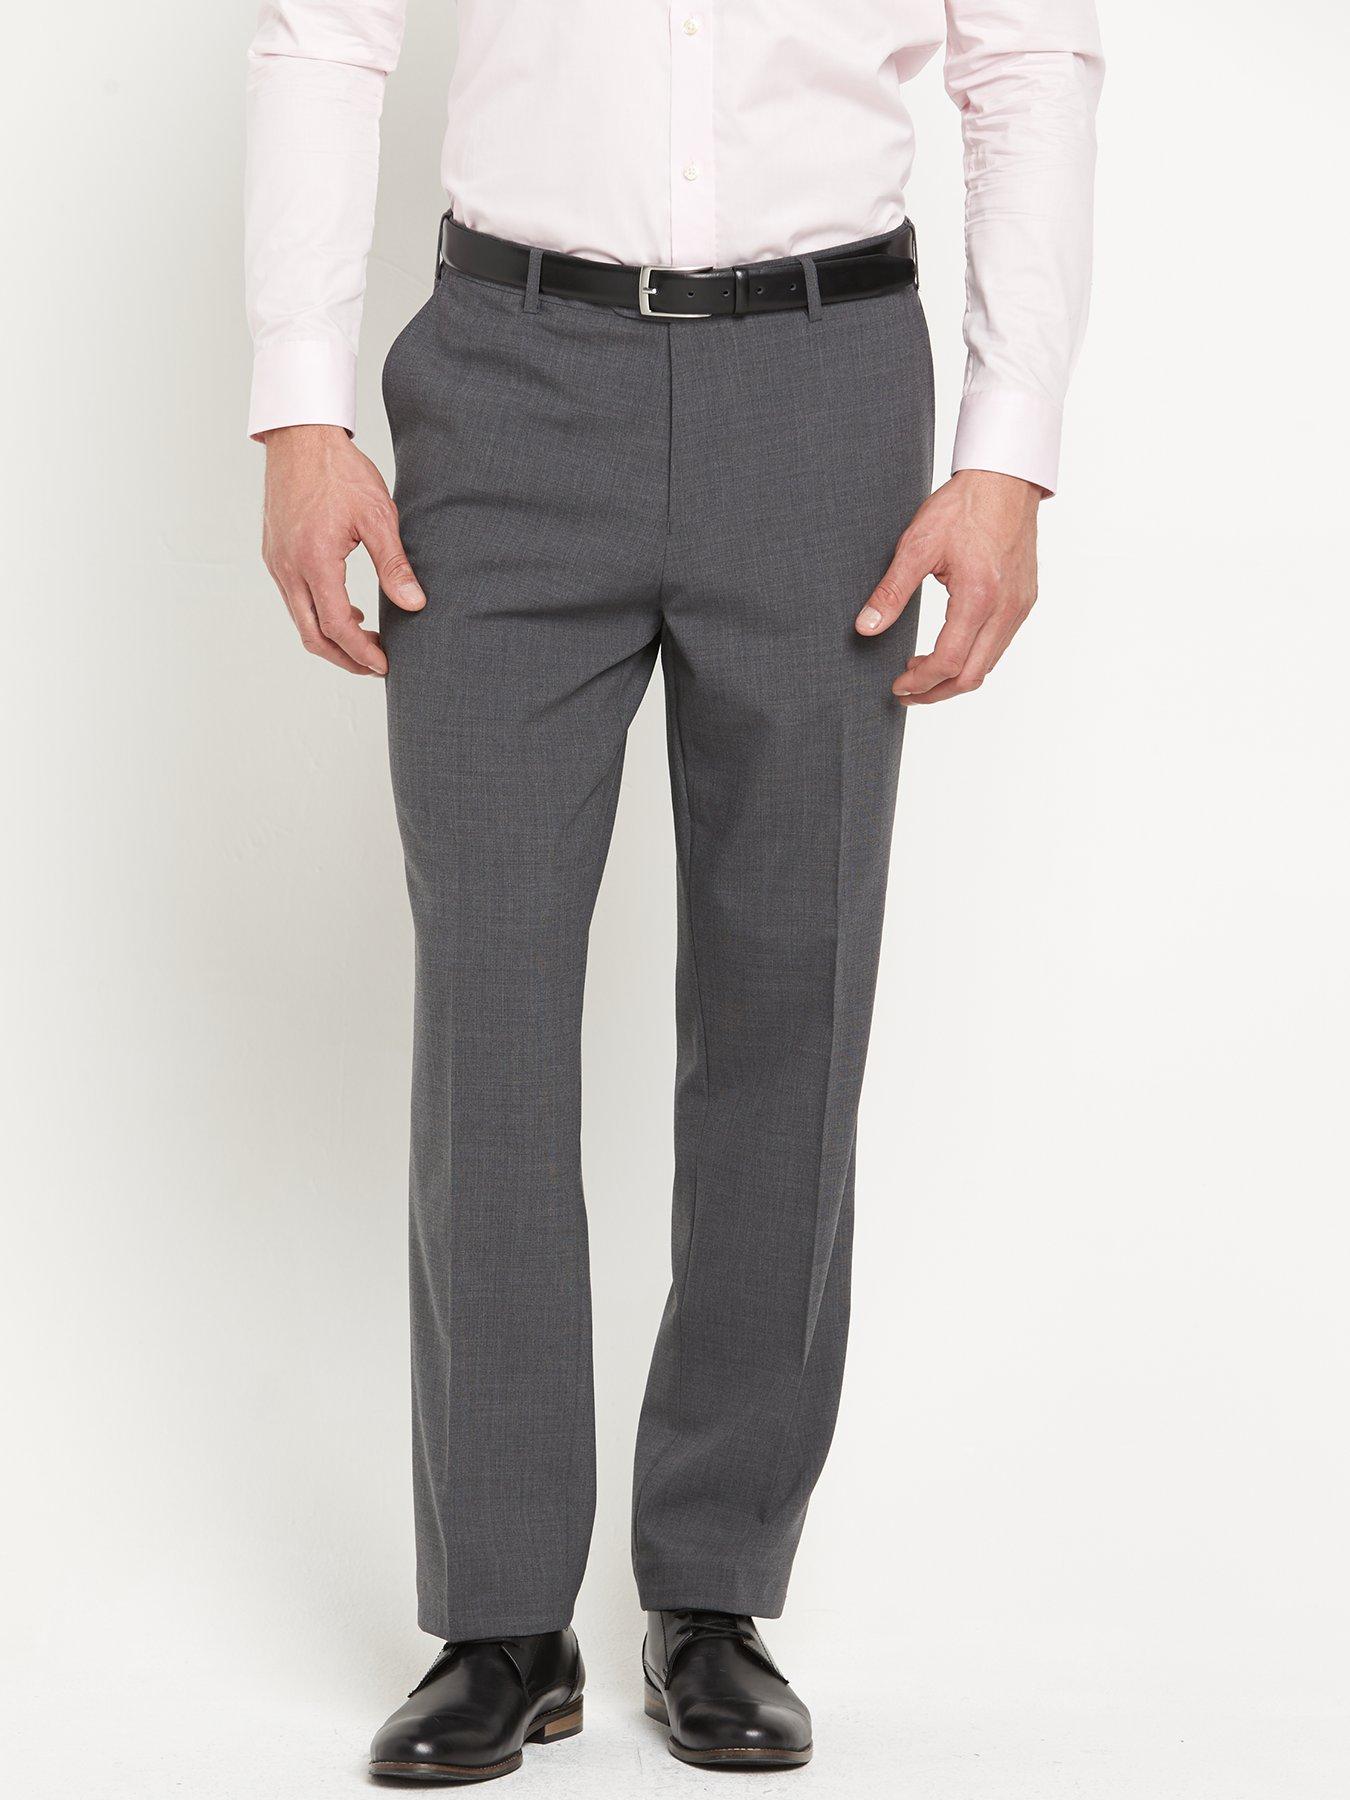 Grey Mens Clothing Trousers Paul & Shark Cotton Pants in Light Grey Slacks and Chinos Formal trousers for Men 